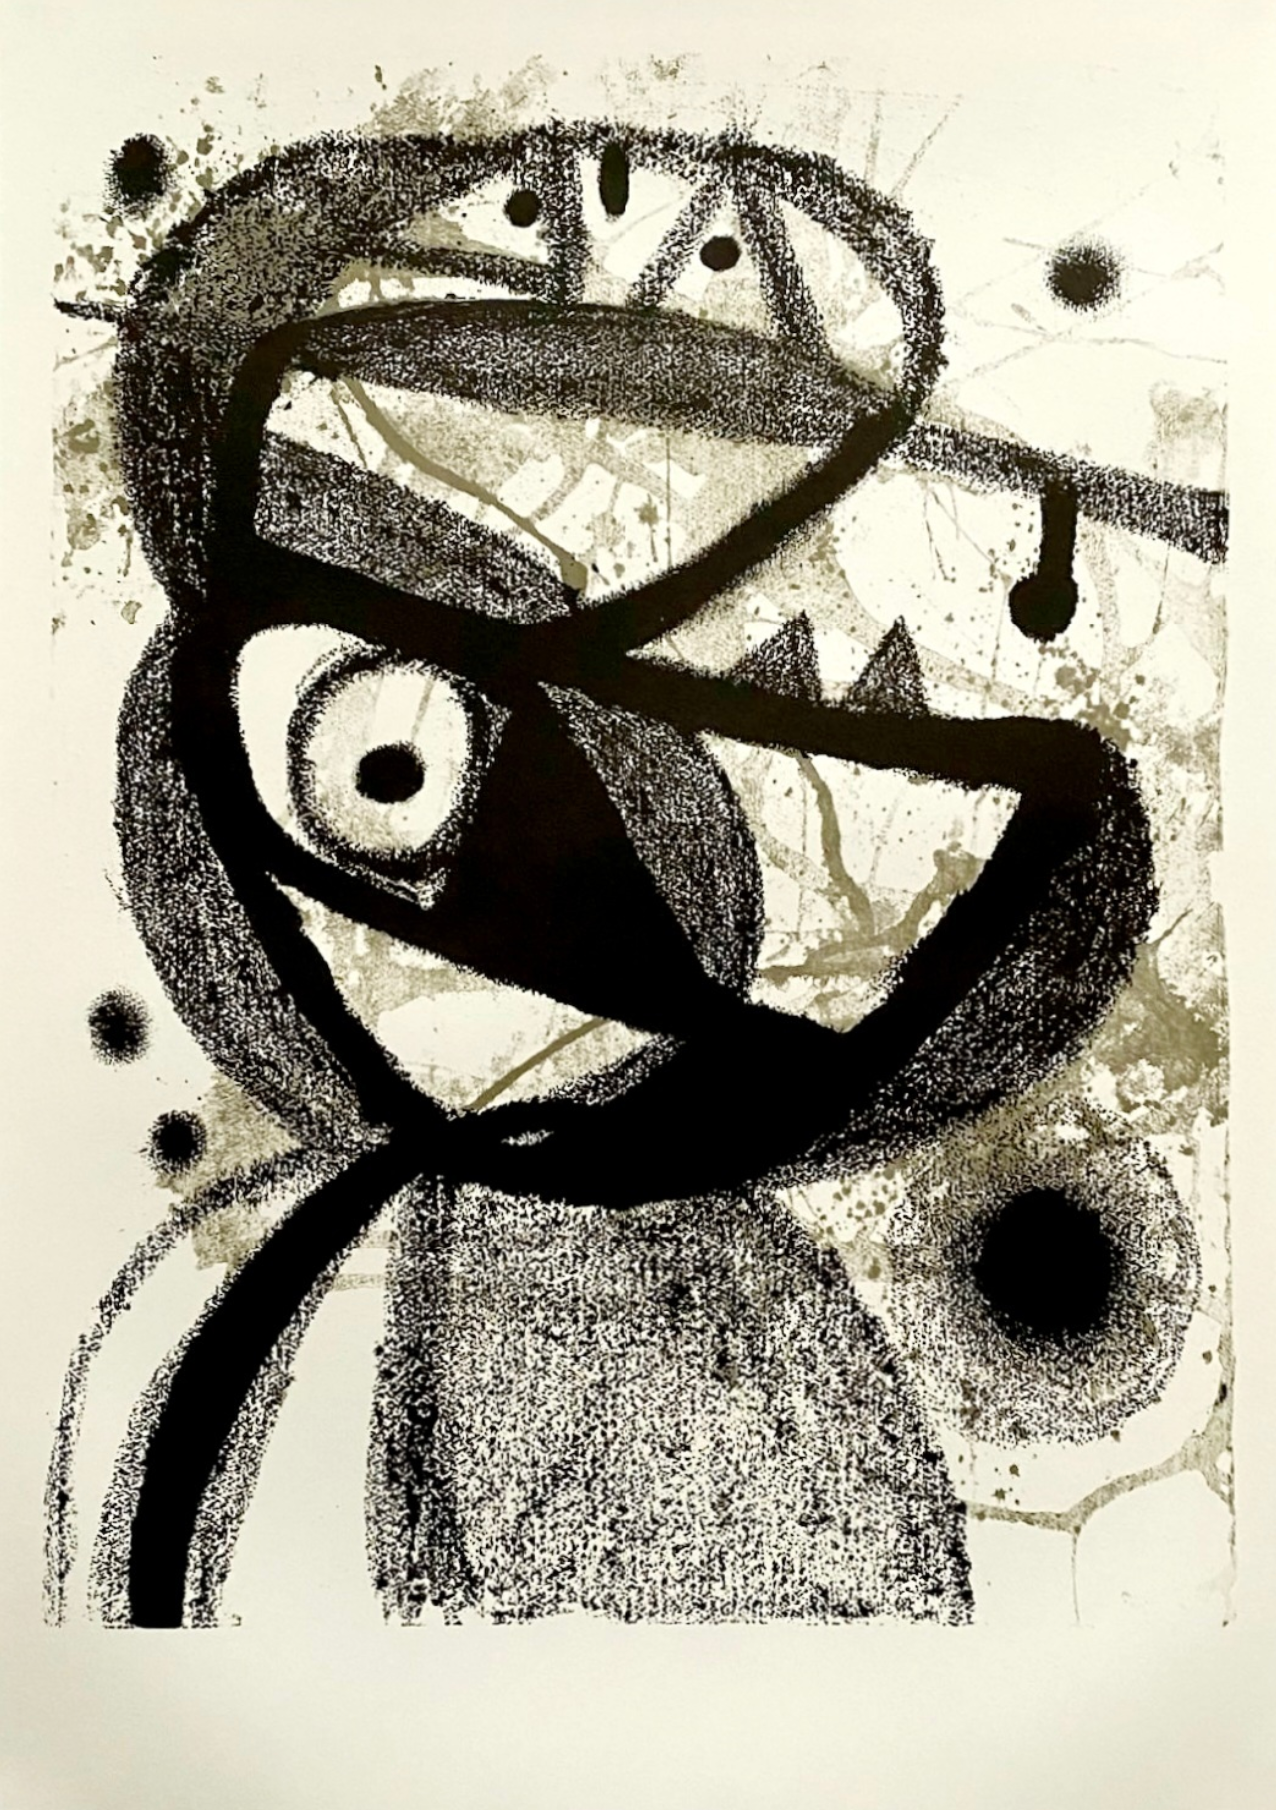 Joan Miró 'PERSONNAGE, 1980’ Lithographic Print from Galerie Maeght